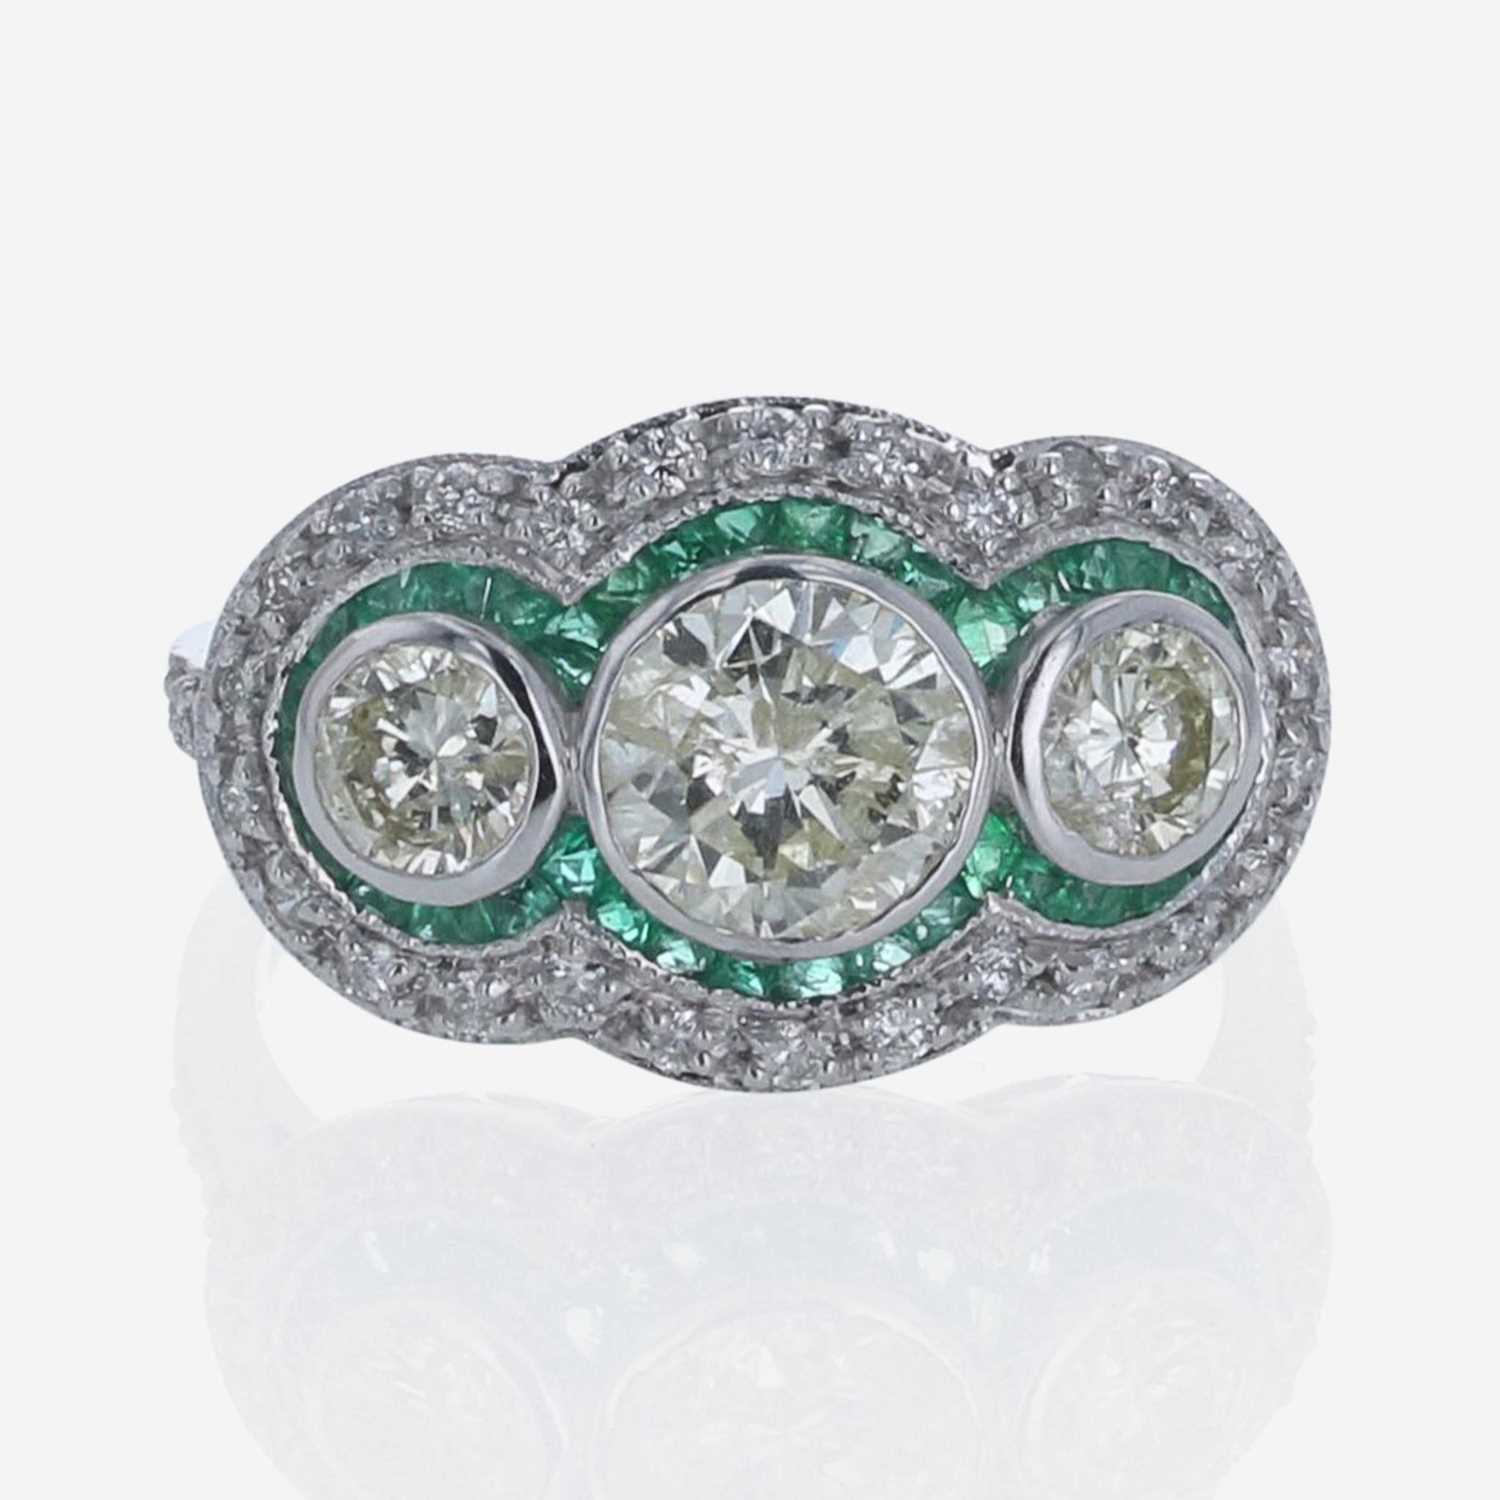 Lot 205 - A Diamond, Emerald, and 18K White Gold Ring